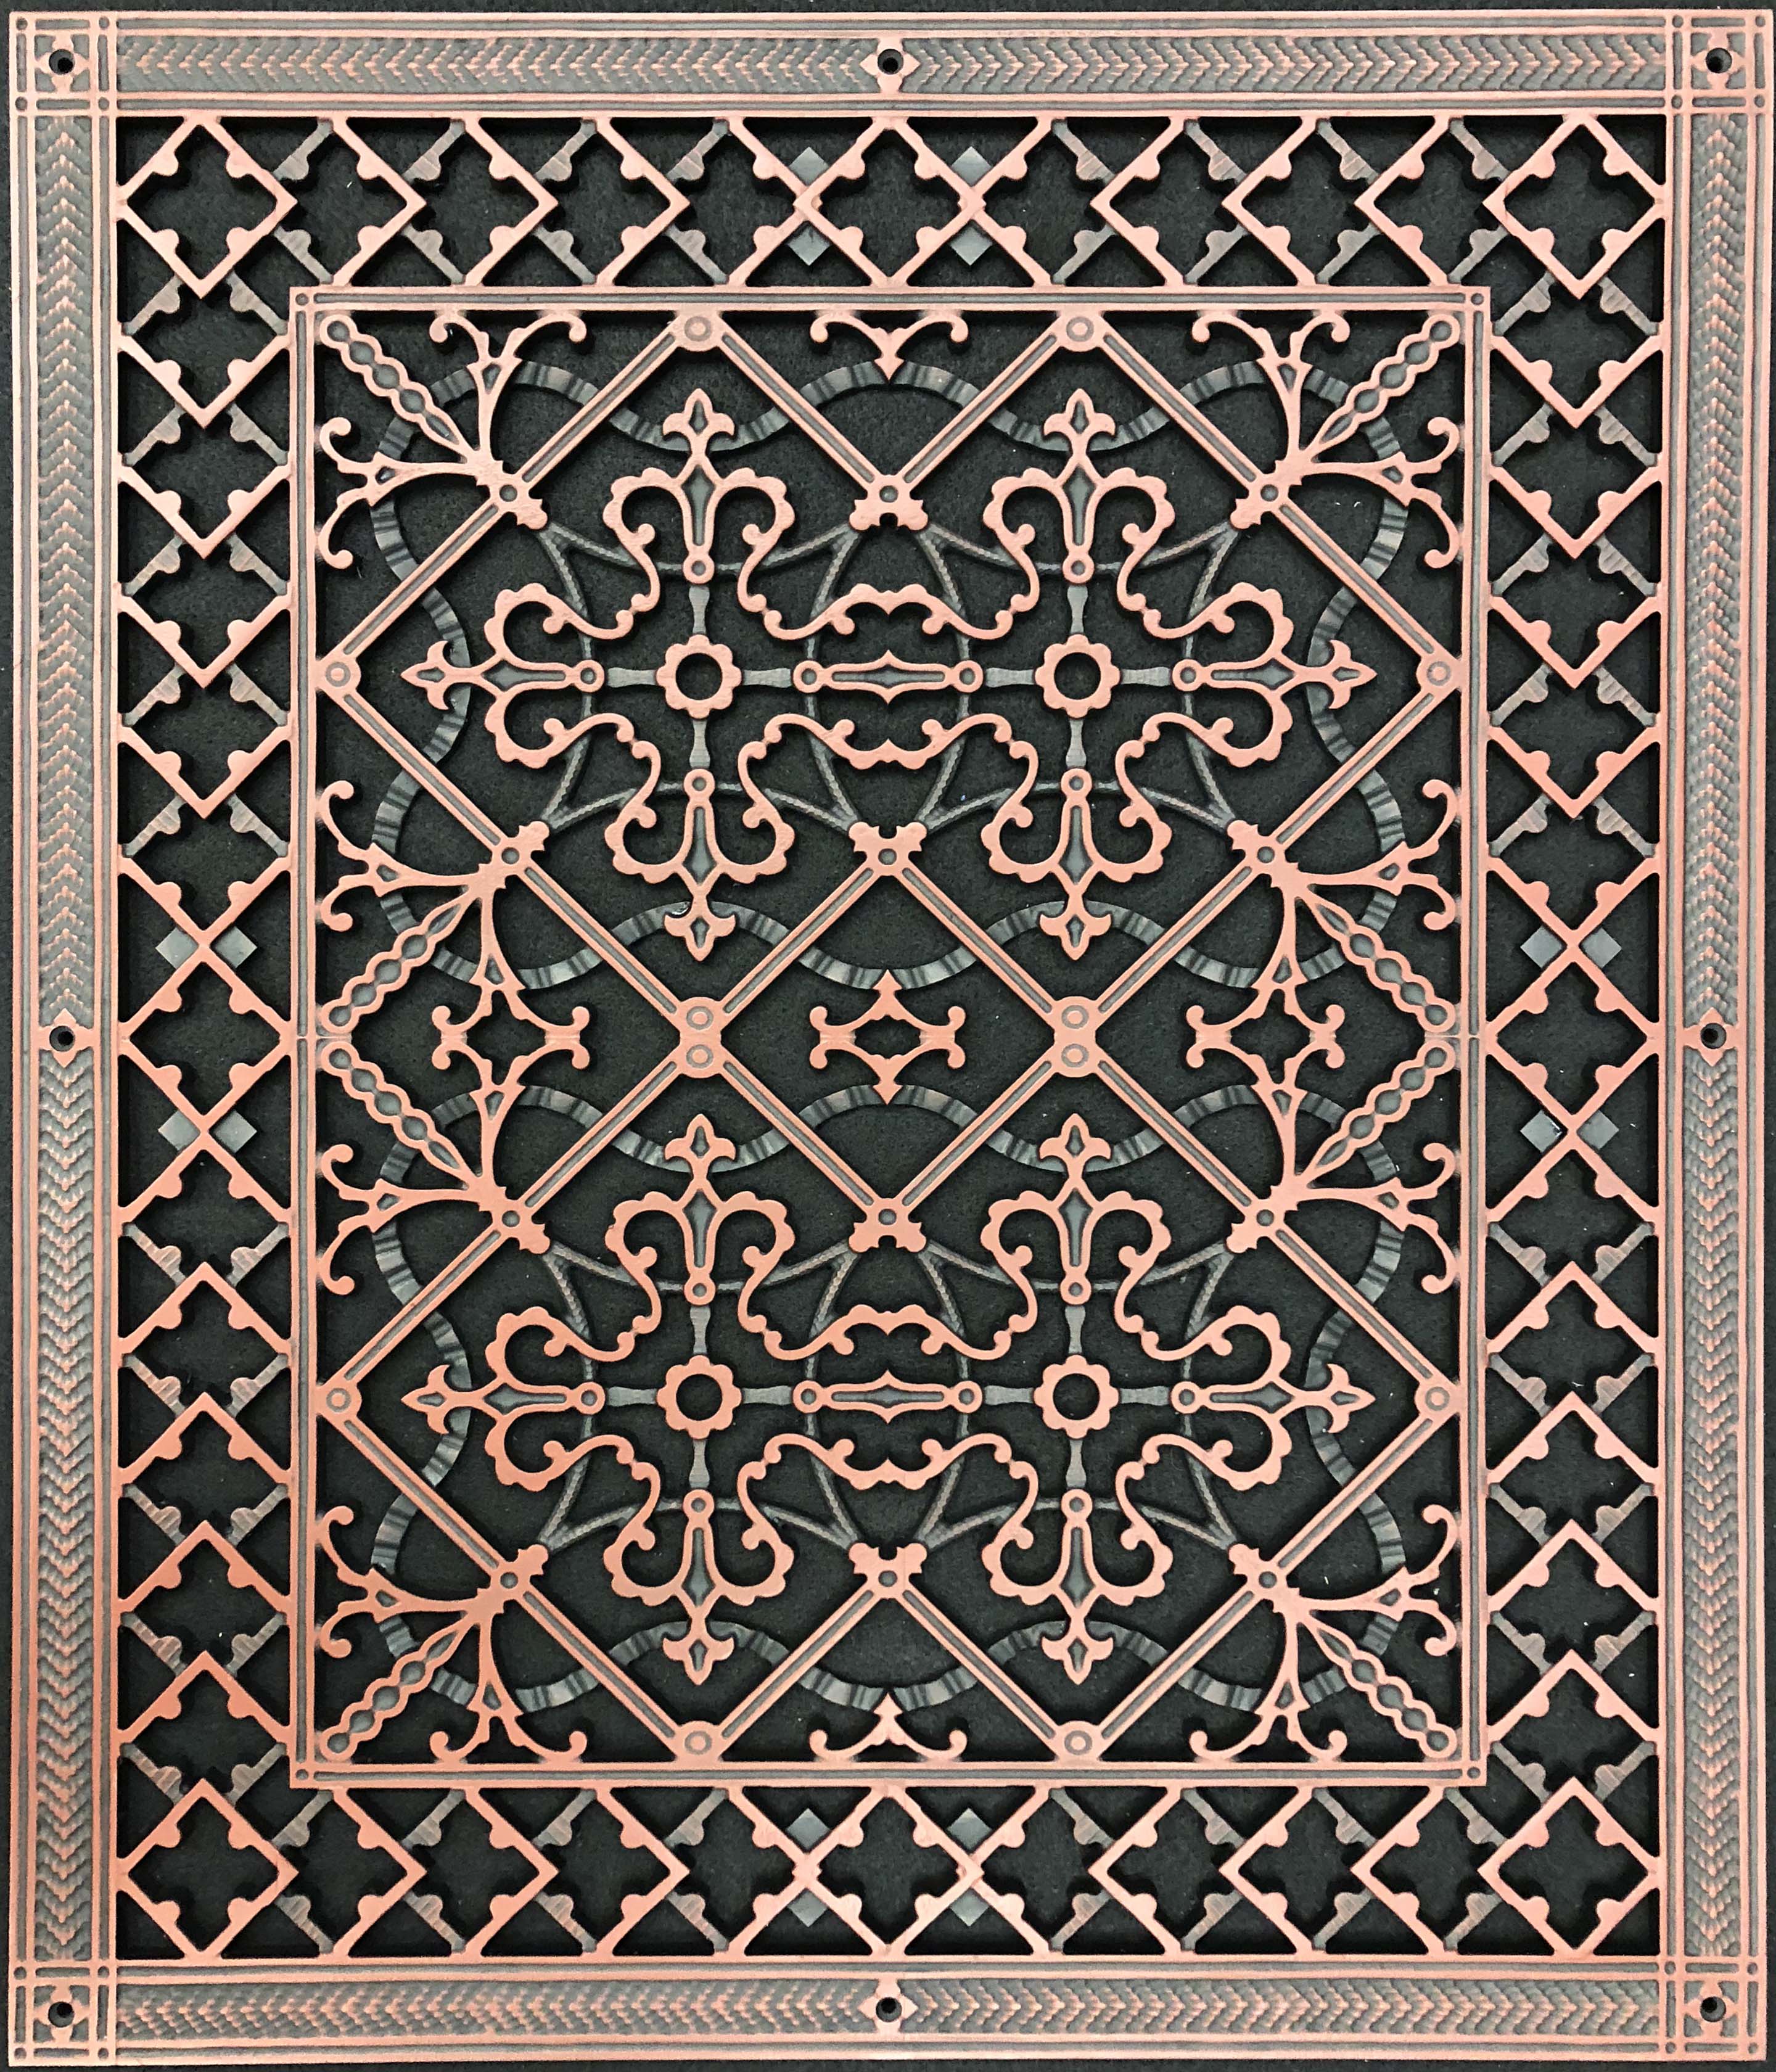 Arts and Crafts decorative grille in Antique Cherry